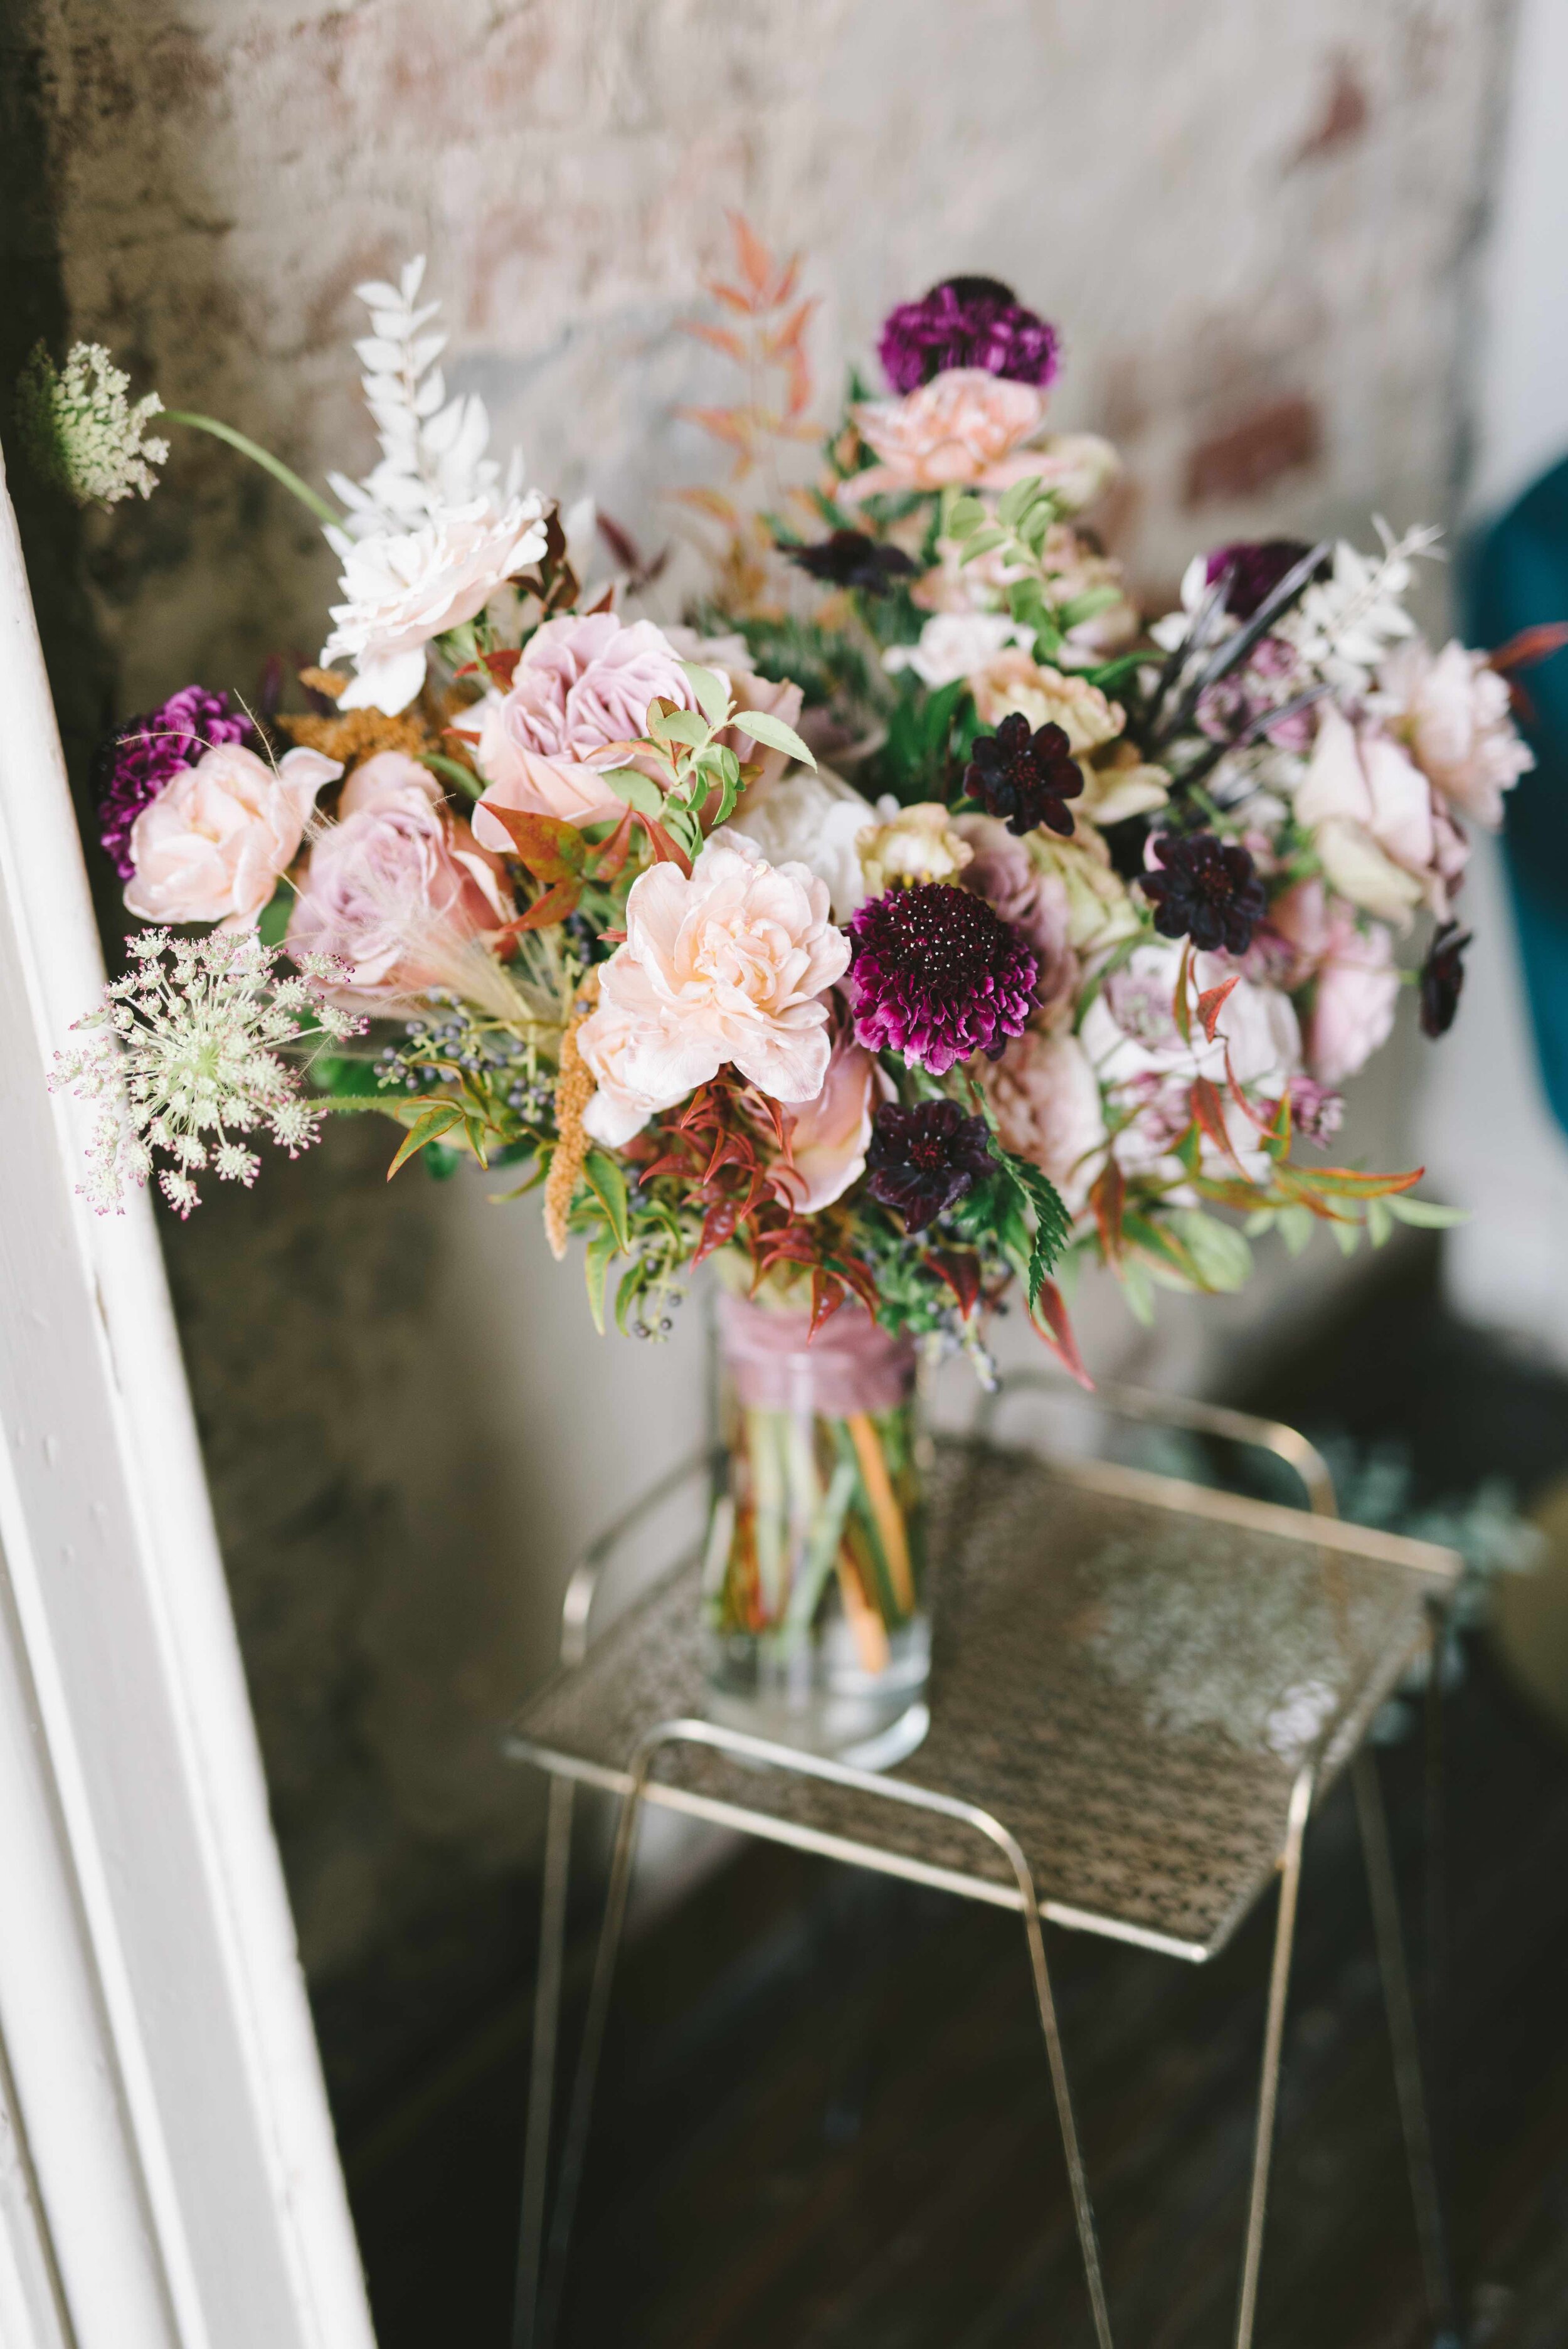 Whimsical bridal bouquet with mauve and blush garden roses and ranunculus, chocolate cosmos, chocolate lace flower, privet berries, white ferns, eggplant scabiosa, and natural greenery. Nashville wedding florist at the Cordelle.